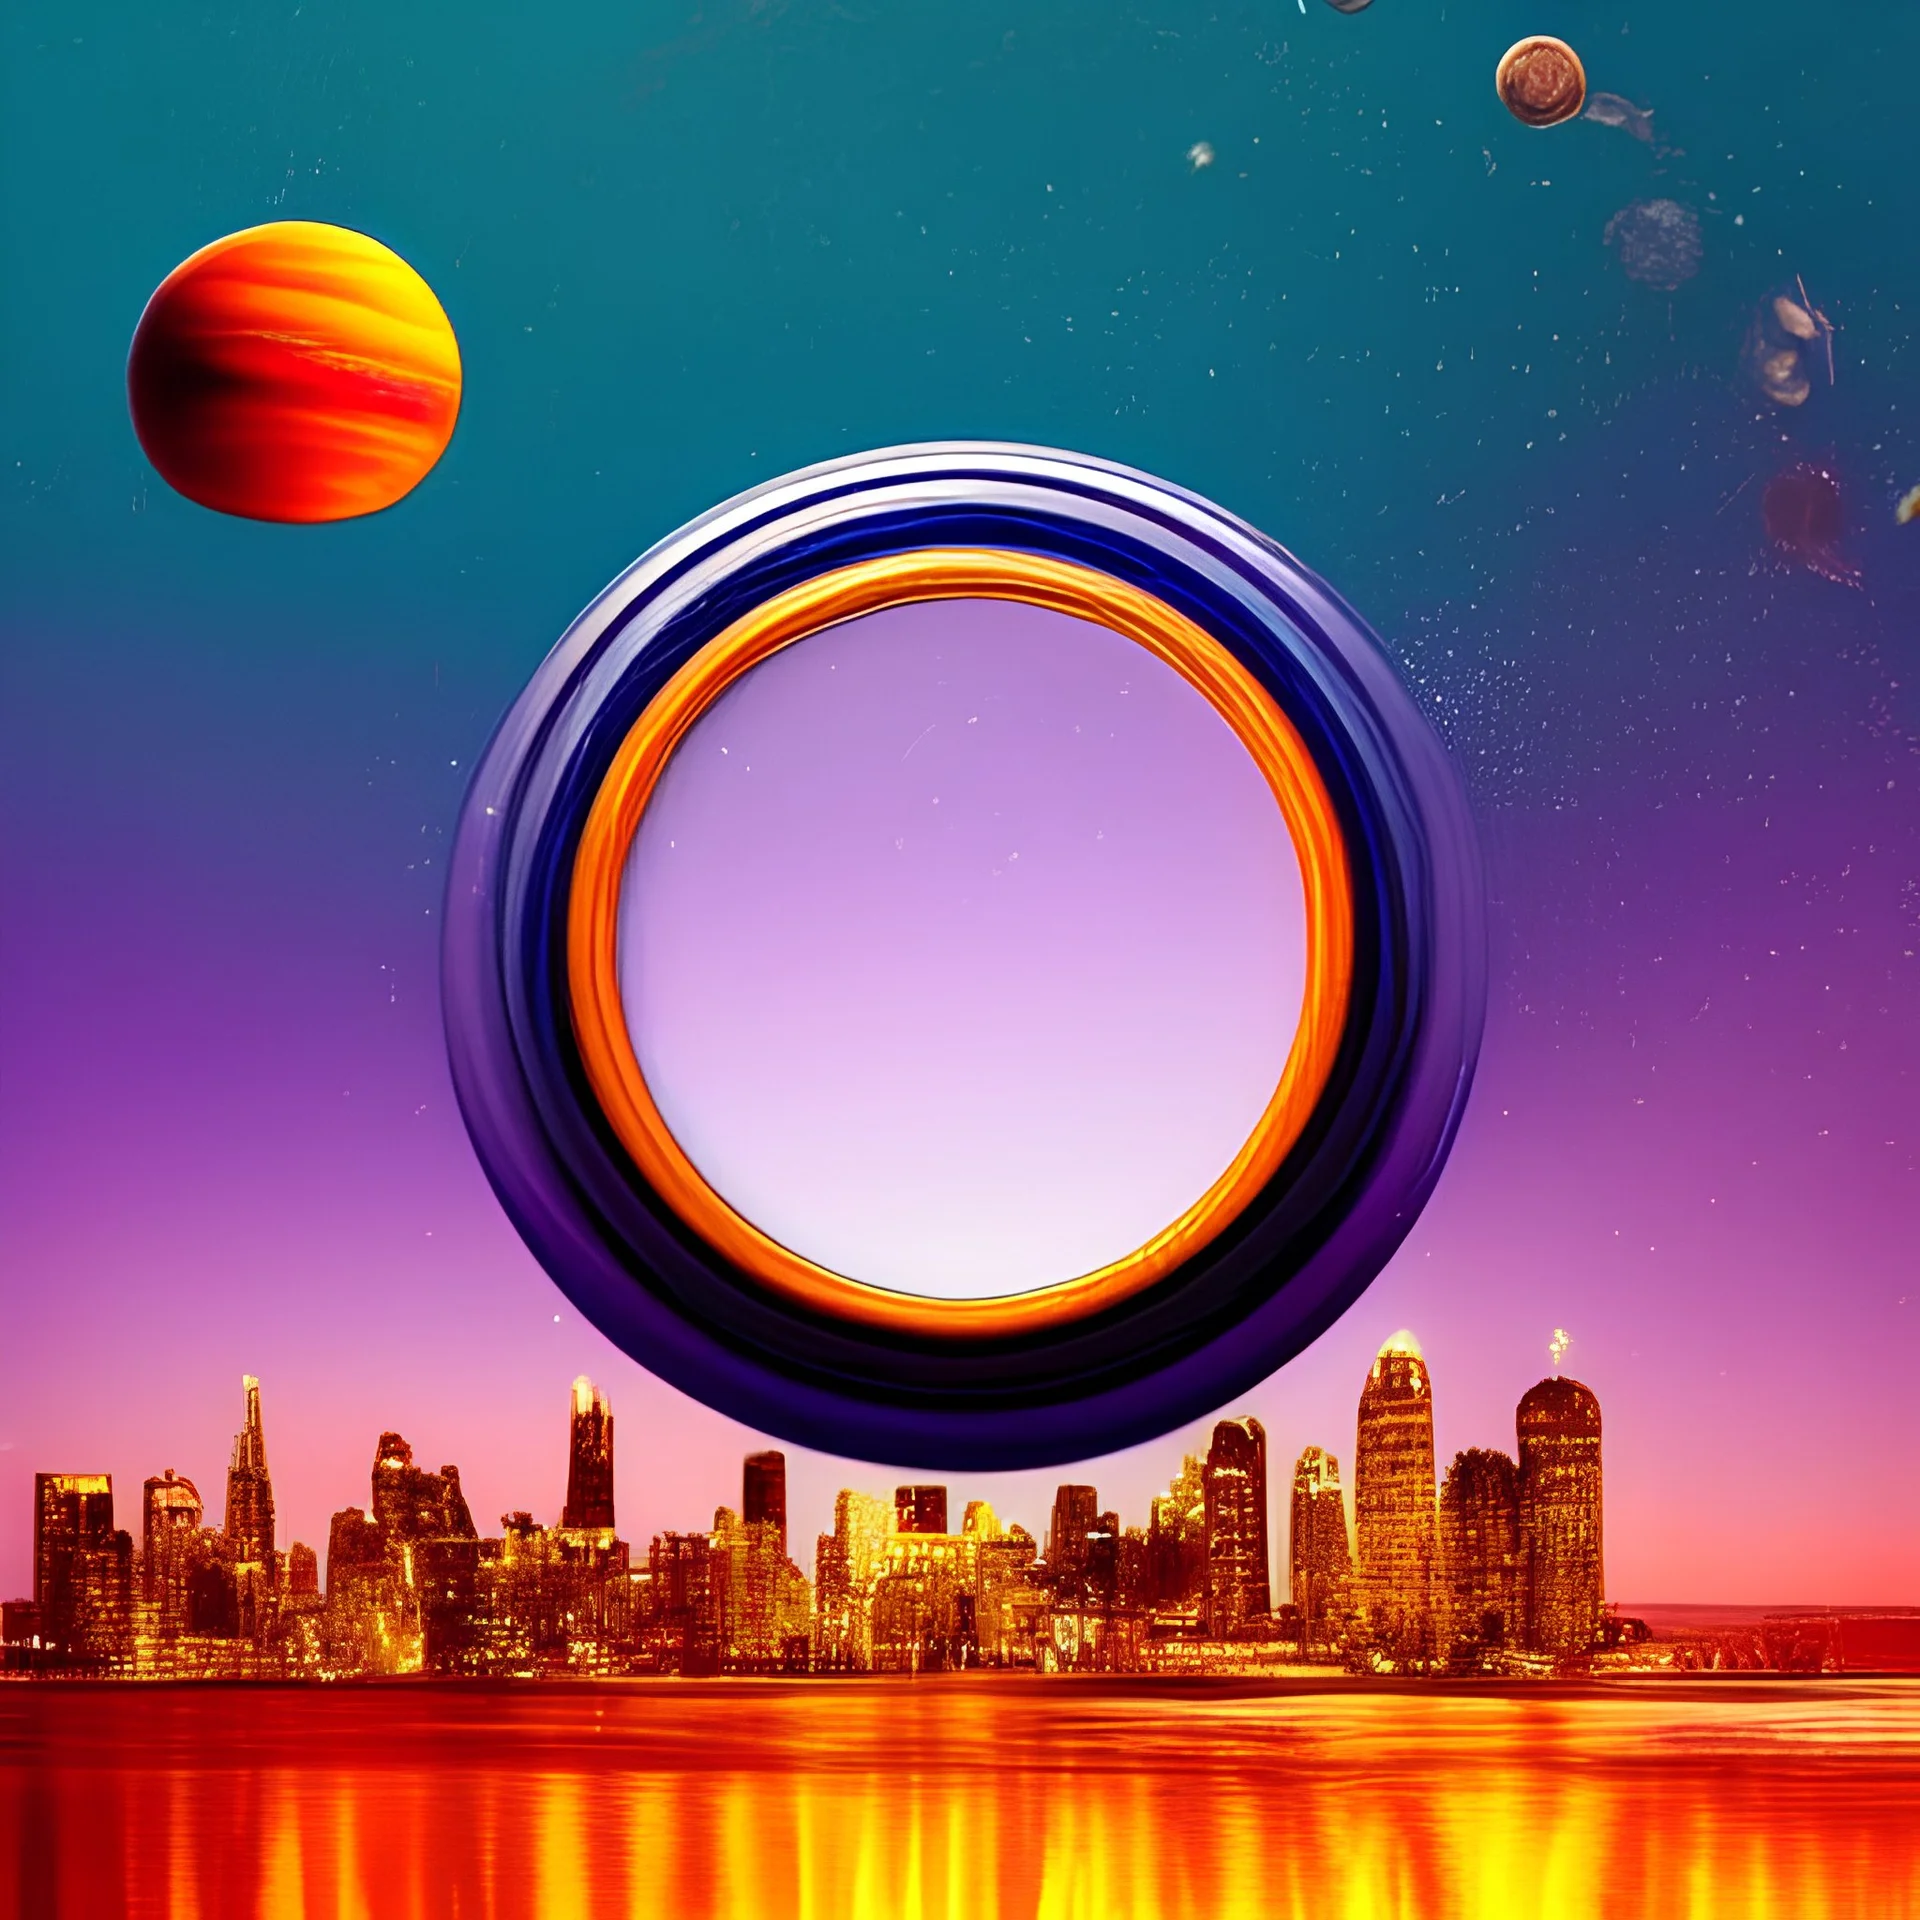 circular picture frame, scene of galaxy and waves, bottom half underwater, top half out of water, showing the sky and city skyline with a large bridge, planets, the great unknown, bridge, friendship and cooperation, light blue tones with purple and orange